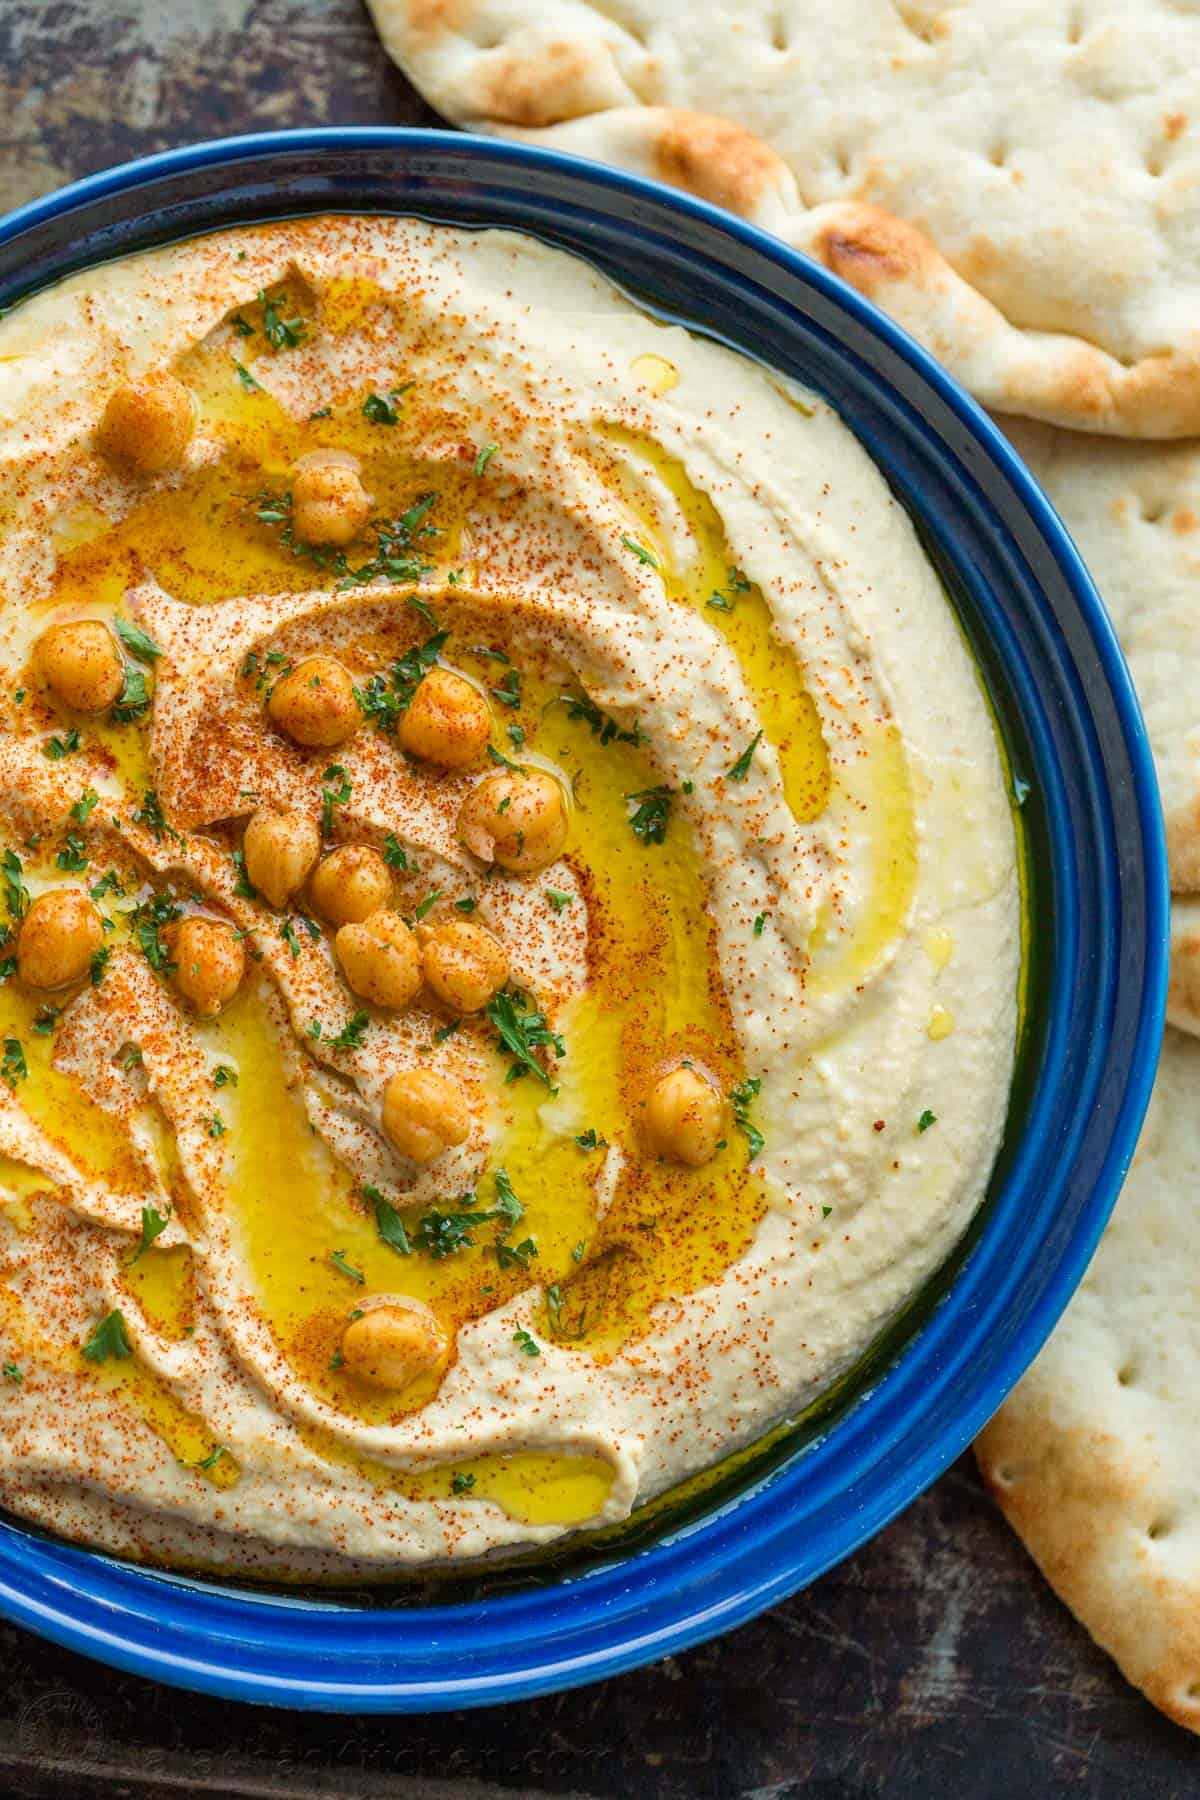 Here’s a recipe for ultra-creamy homemade hummus with the perfect balance of garlic, lemon juice, and tahini: